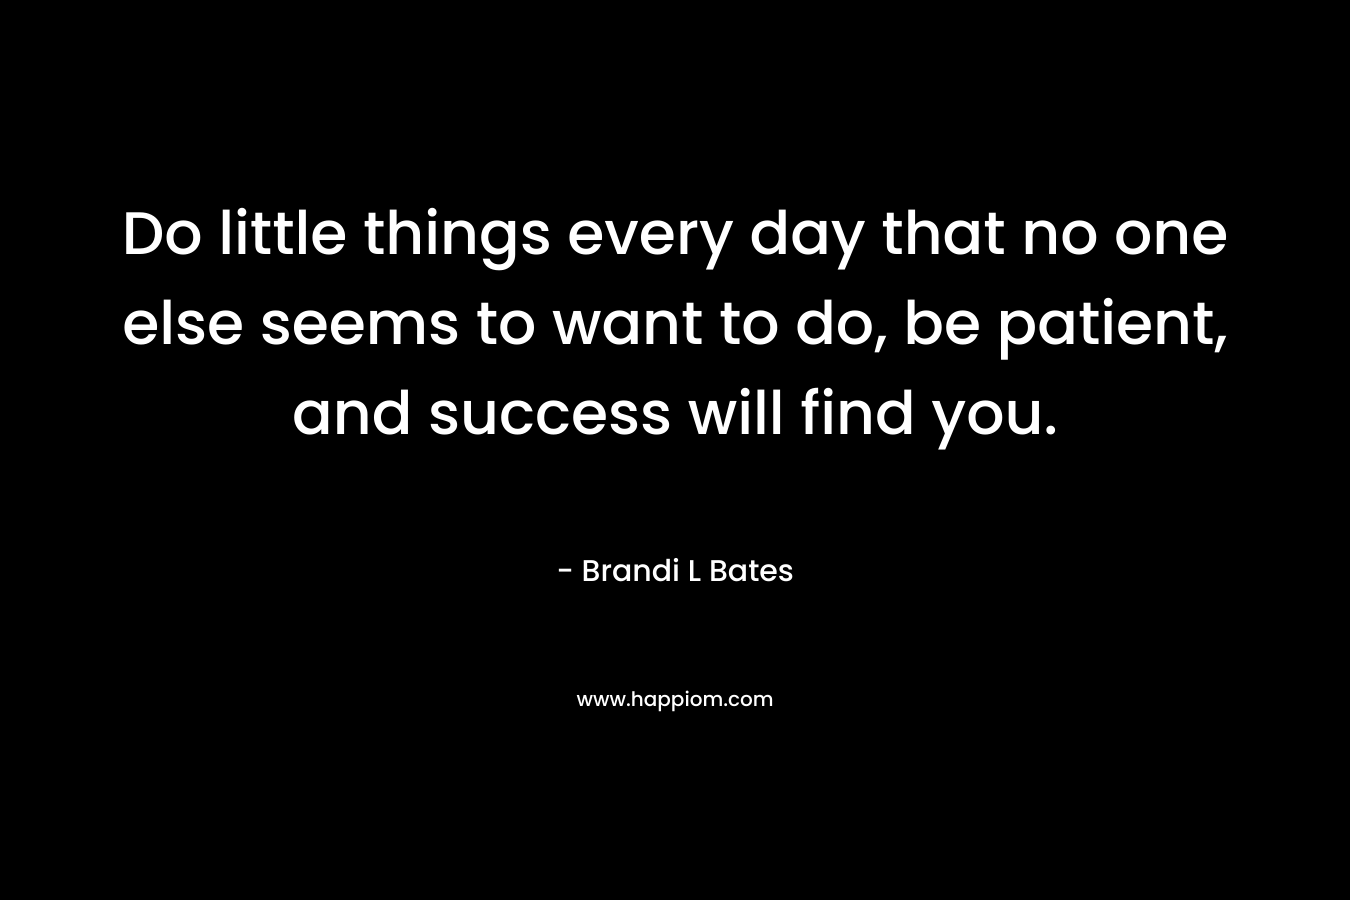 Do little things every day that no one else seems to want to do, be patient, and success will find you. – Brandi L Bates